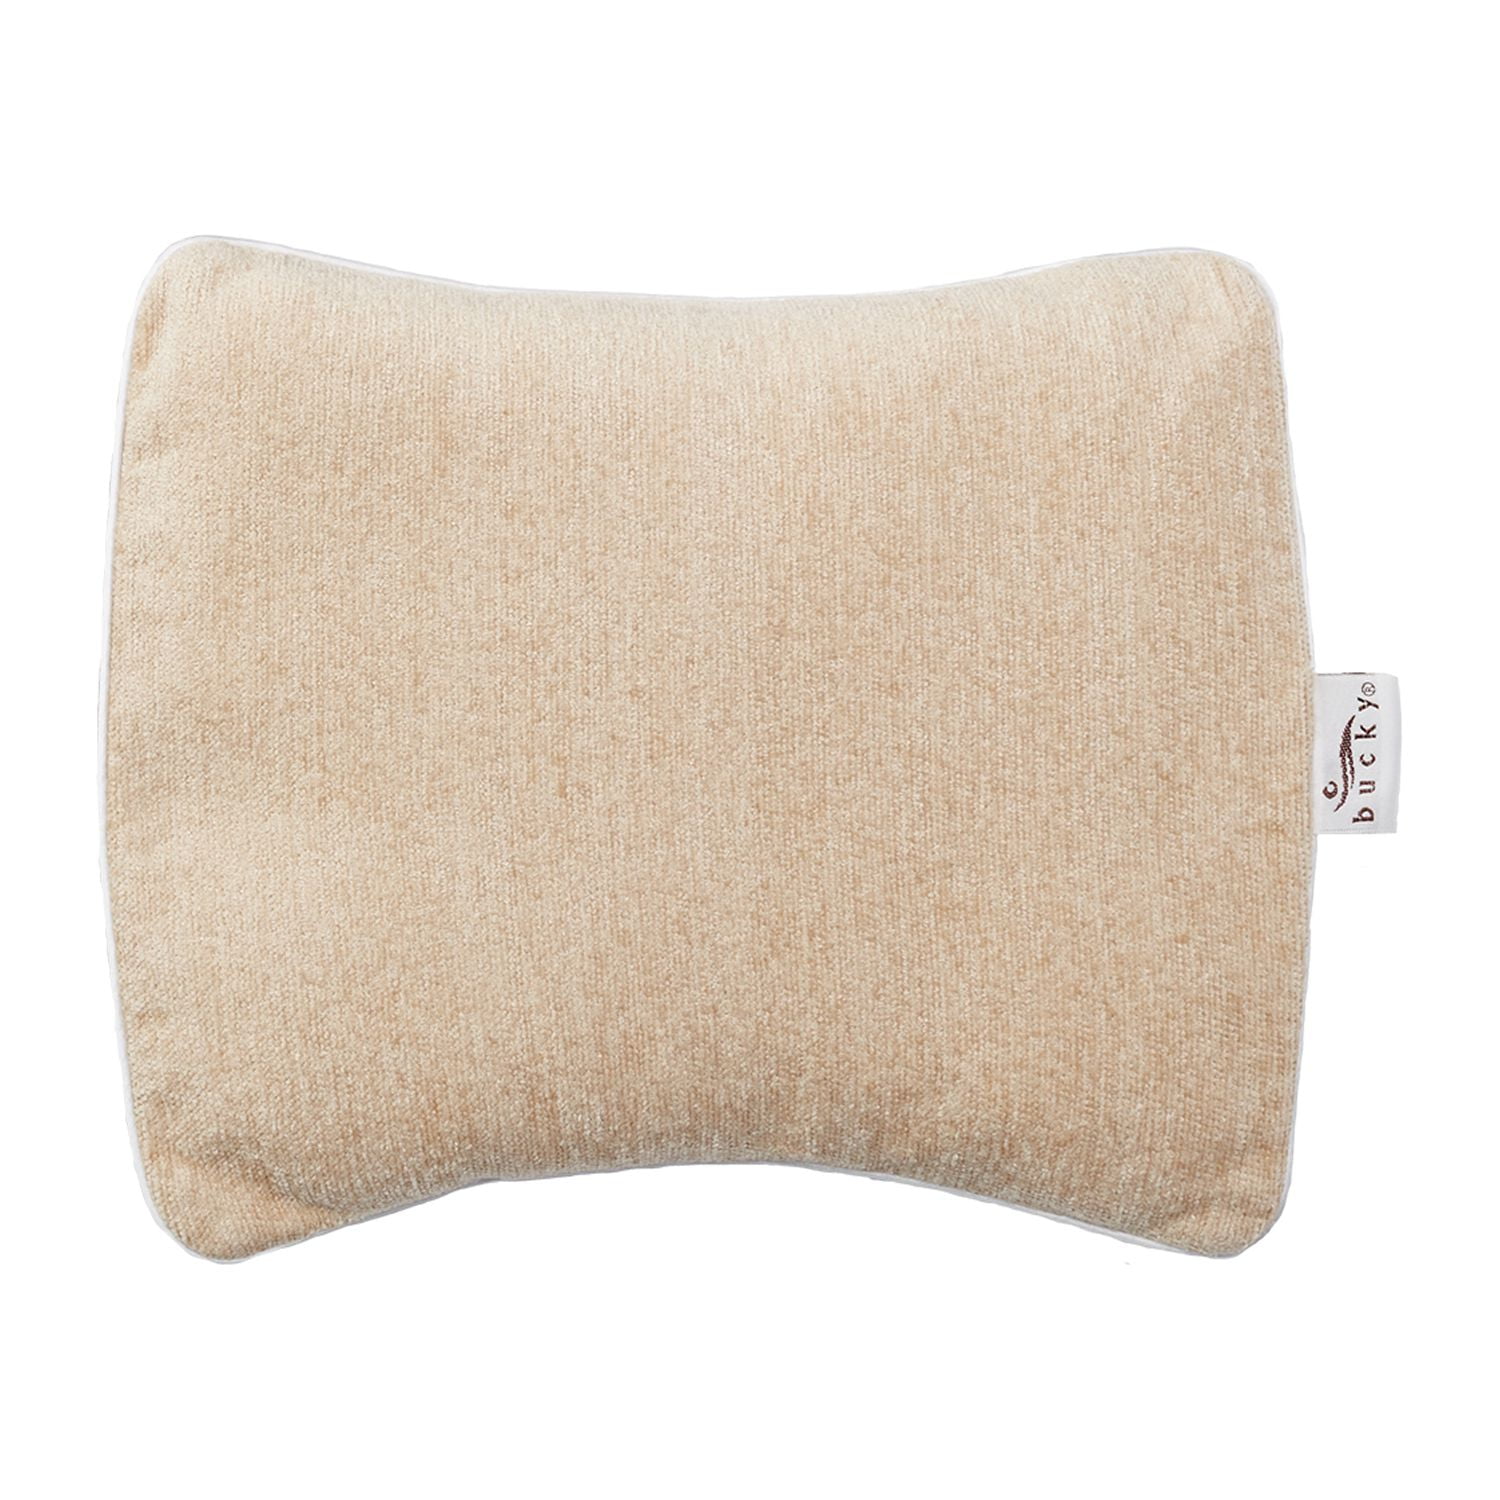 Bucky Sand Hot/Cold Therapy Compact Wrap - Walmart.com